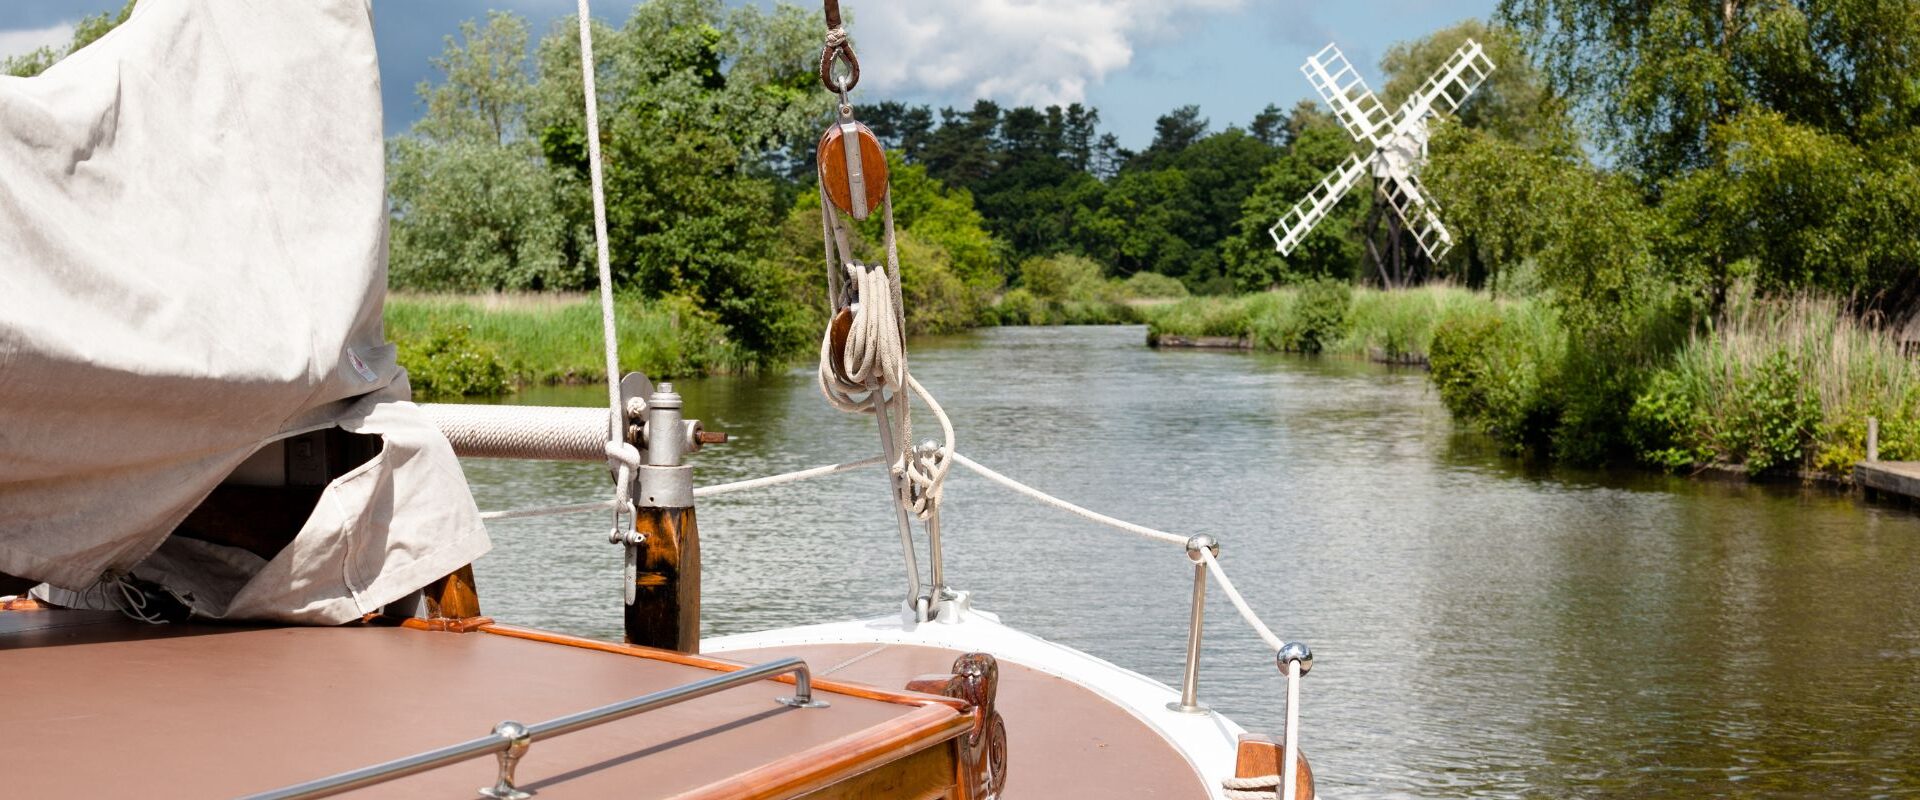 Holiday Cottages in East Anglia - boat on Norfolk Broads